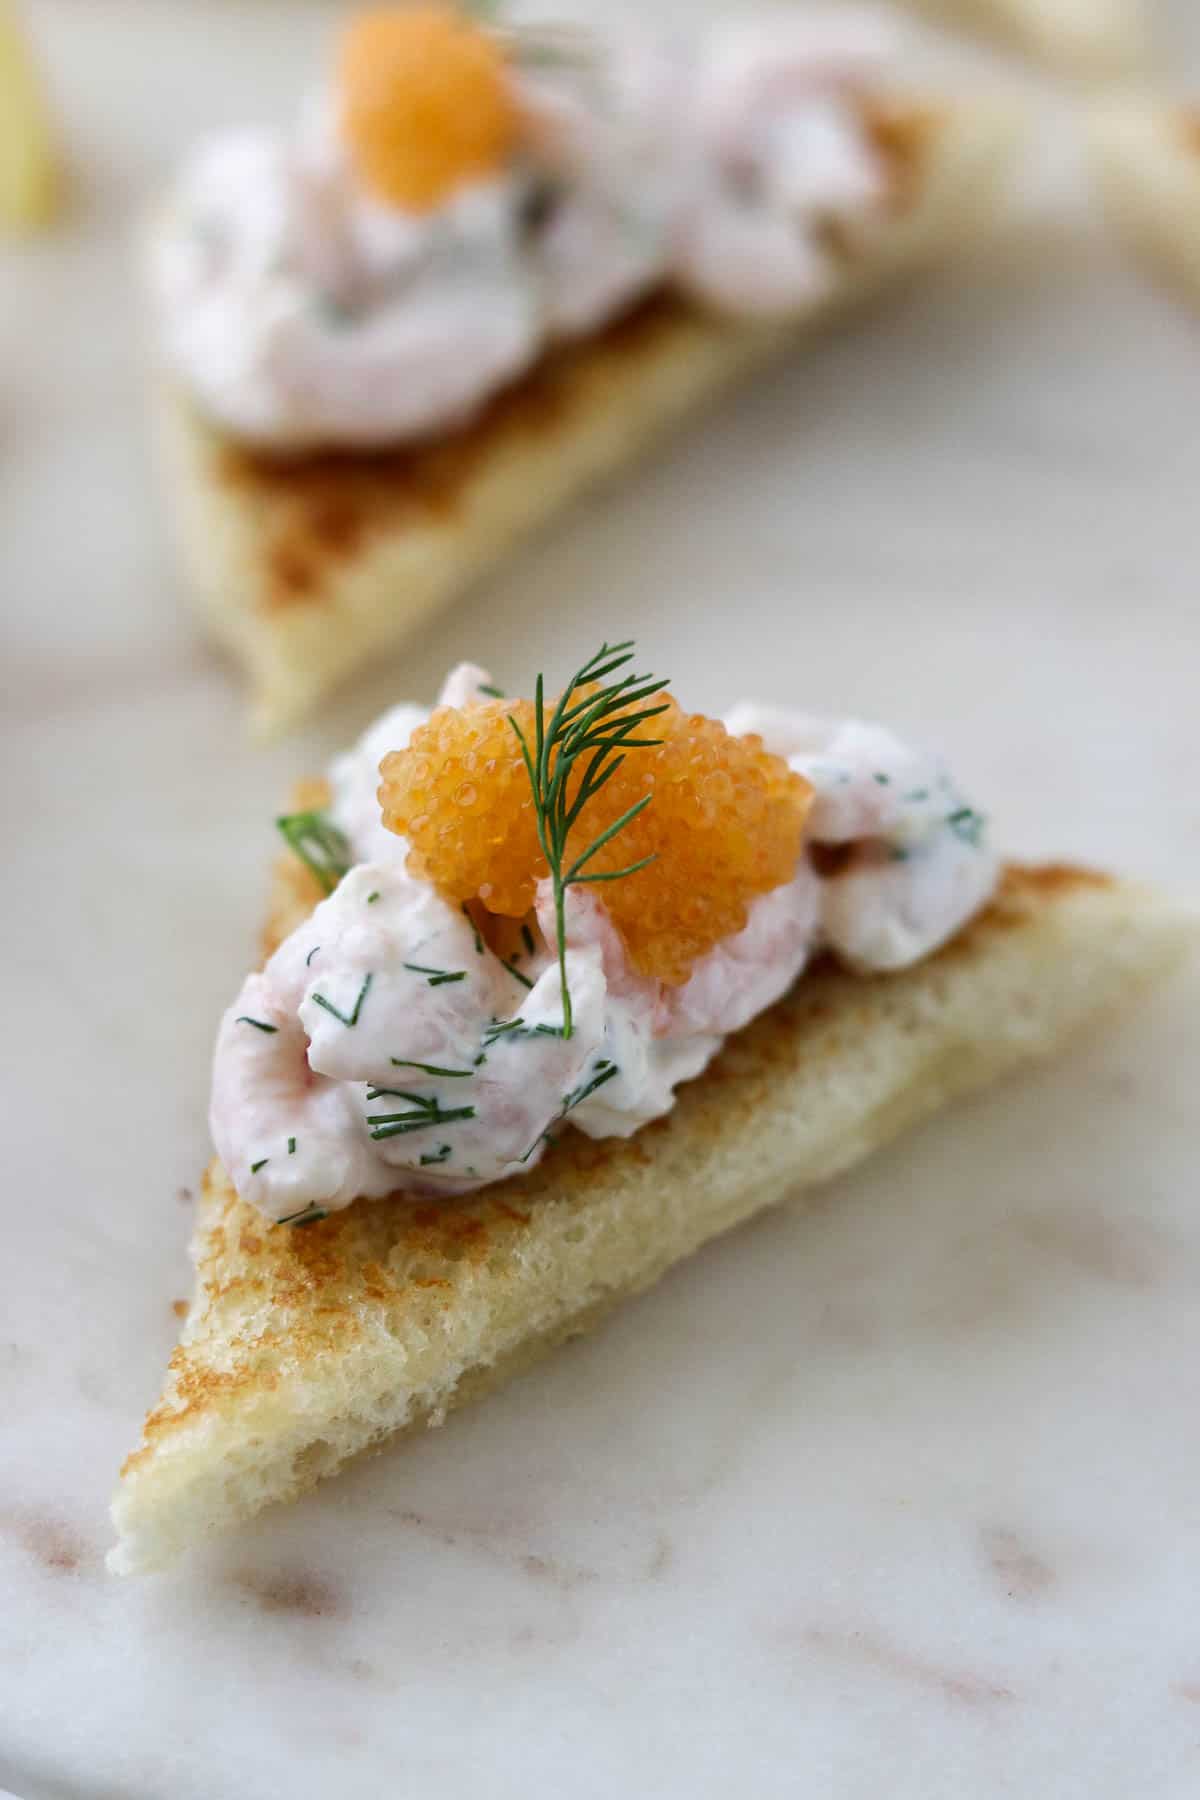 Skagenröra on top of toasted white bread with caviar on top.